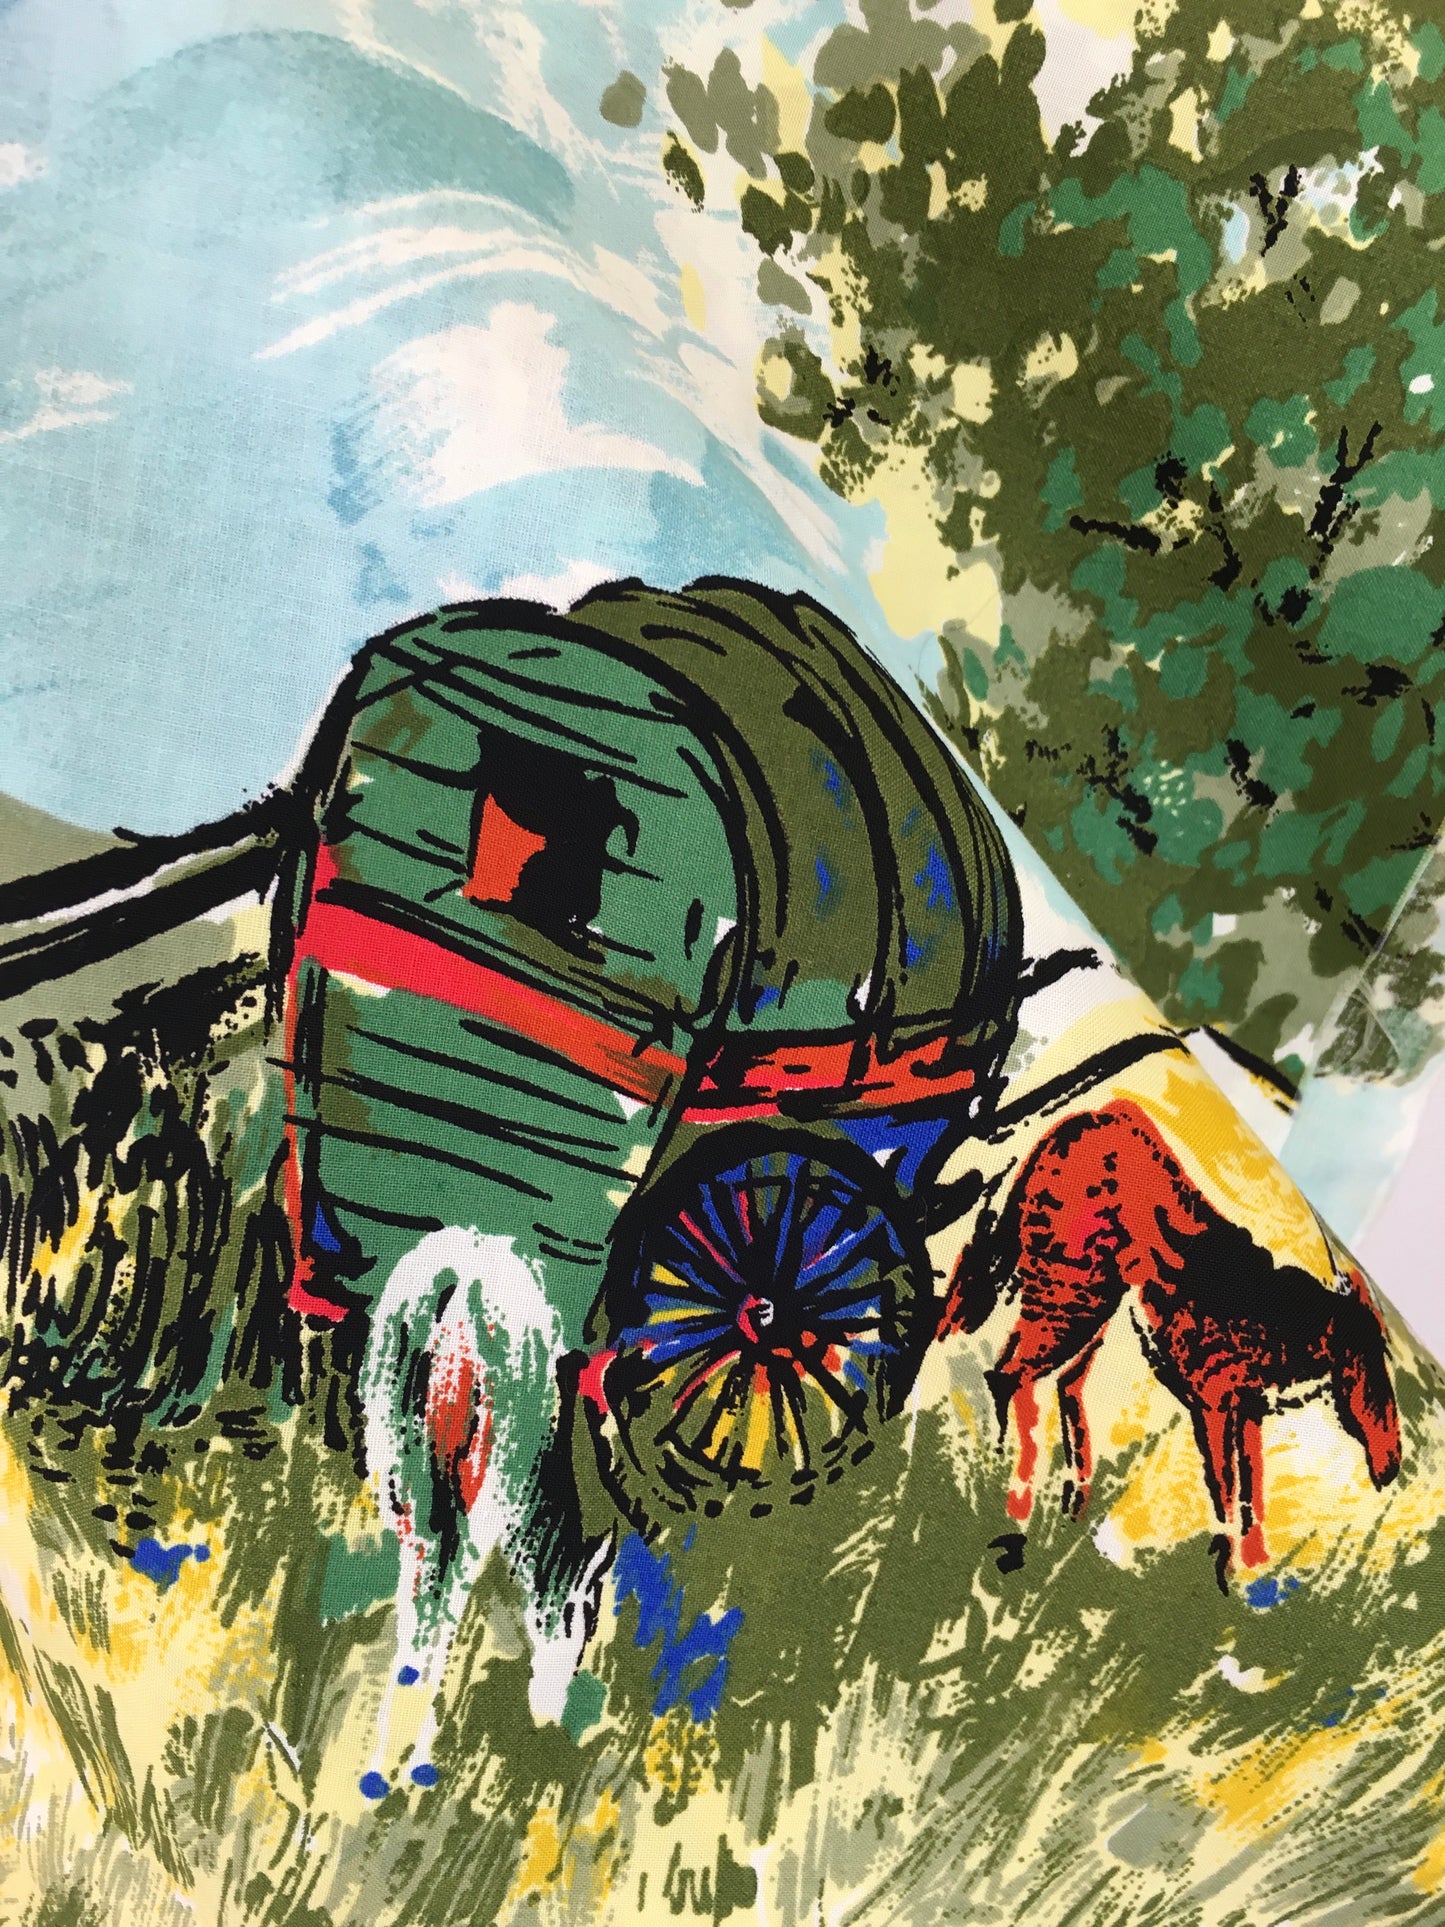 Original 1950s Novelty Cotton Fabric - Featuring Stagecoach’s, Horses, People and Landscape